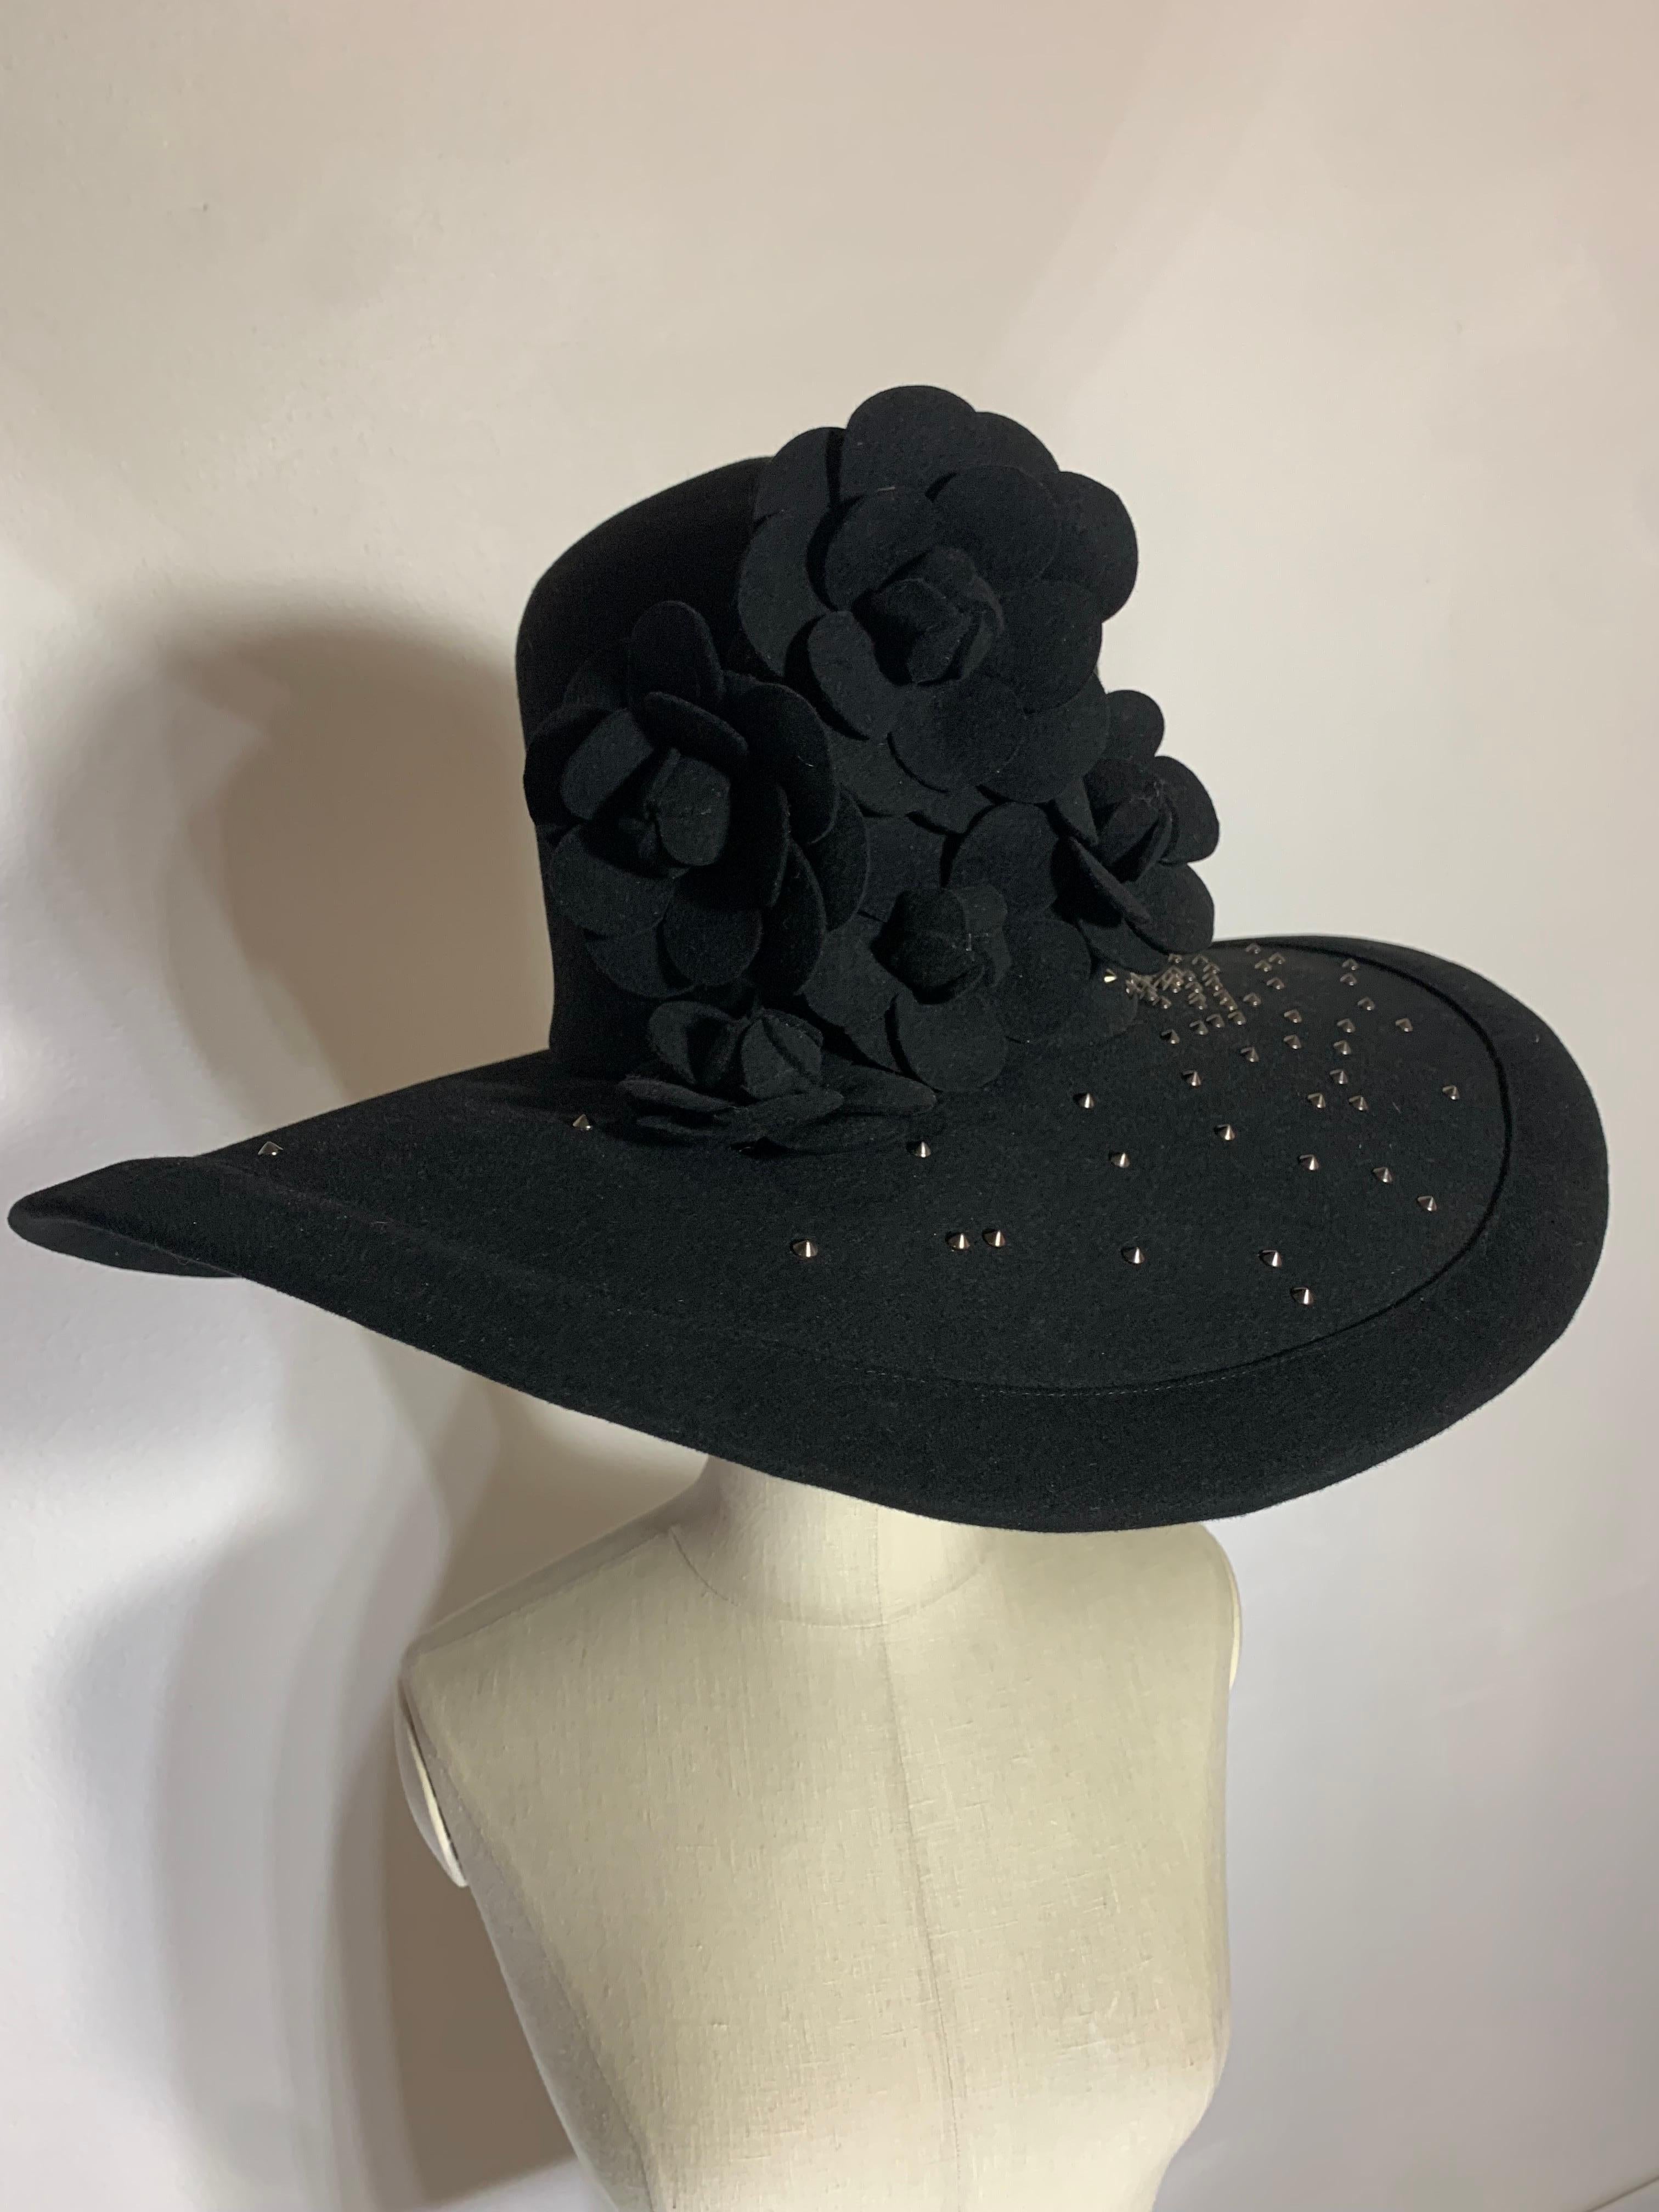 Maison Michel Black Large Brimmed Felt High Crown Hat w Studs & Camellia Flowers: Silver triangular metal stud embellishments are found scattered on brim body and crown. Large bouquet of cascading black felt camellia at front of hat. Brim falls in a